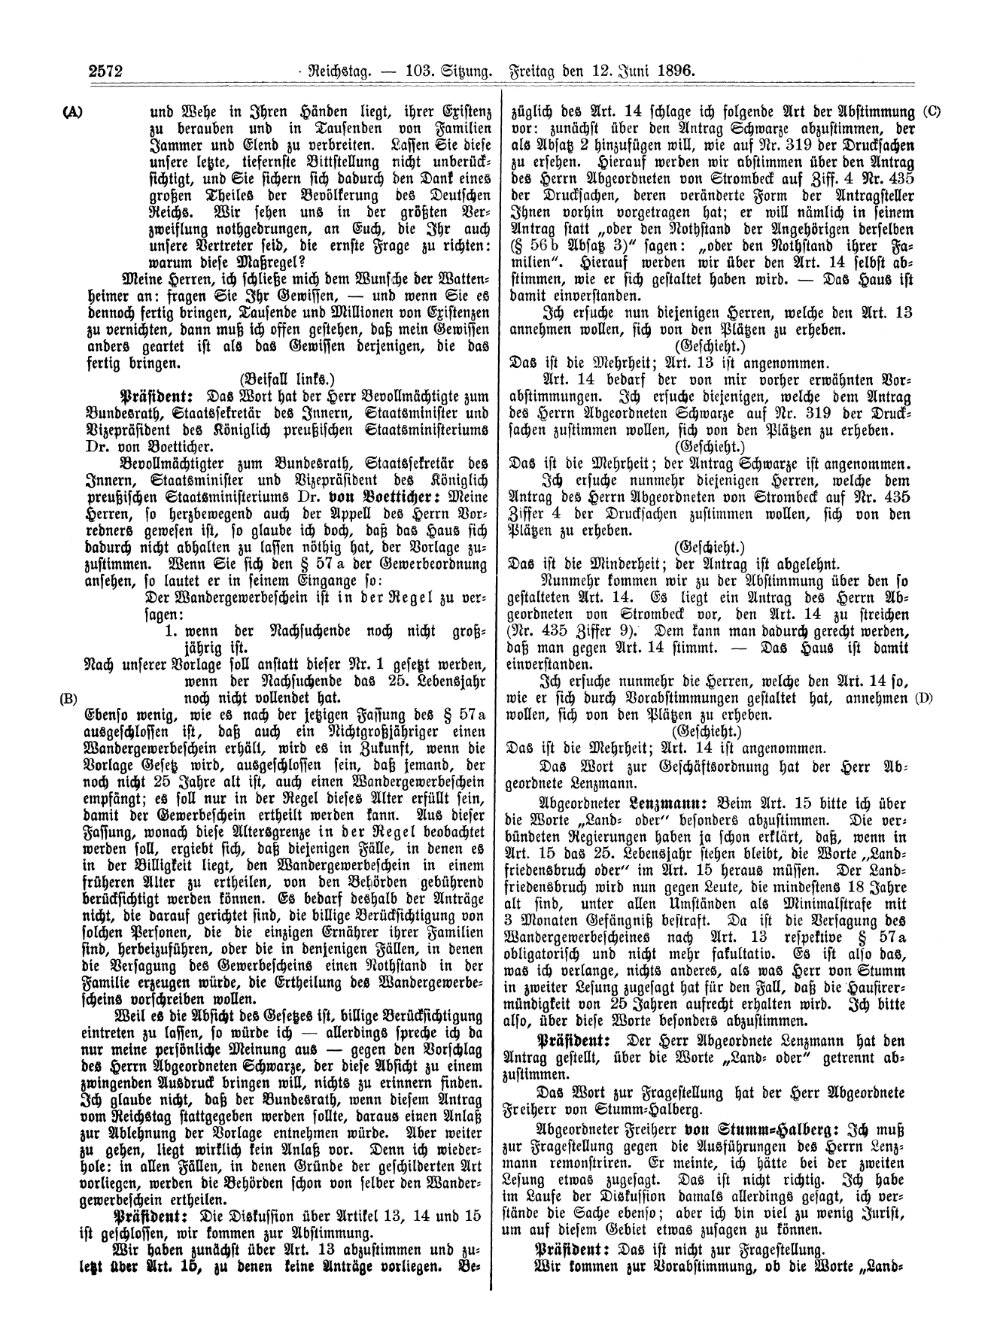 Scan of page 2572